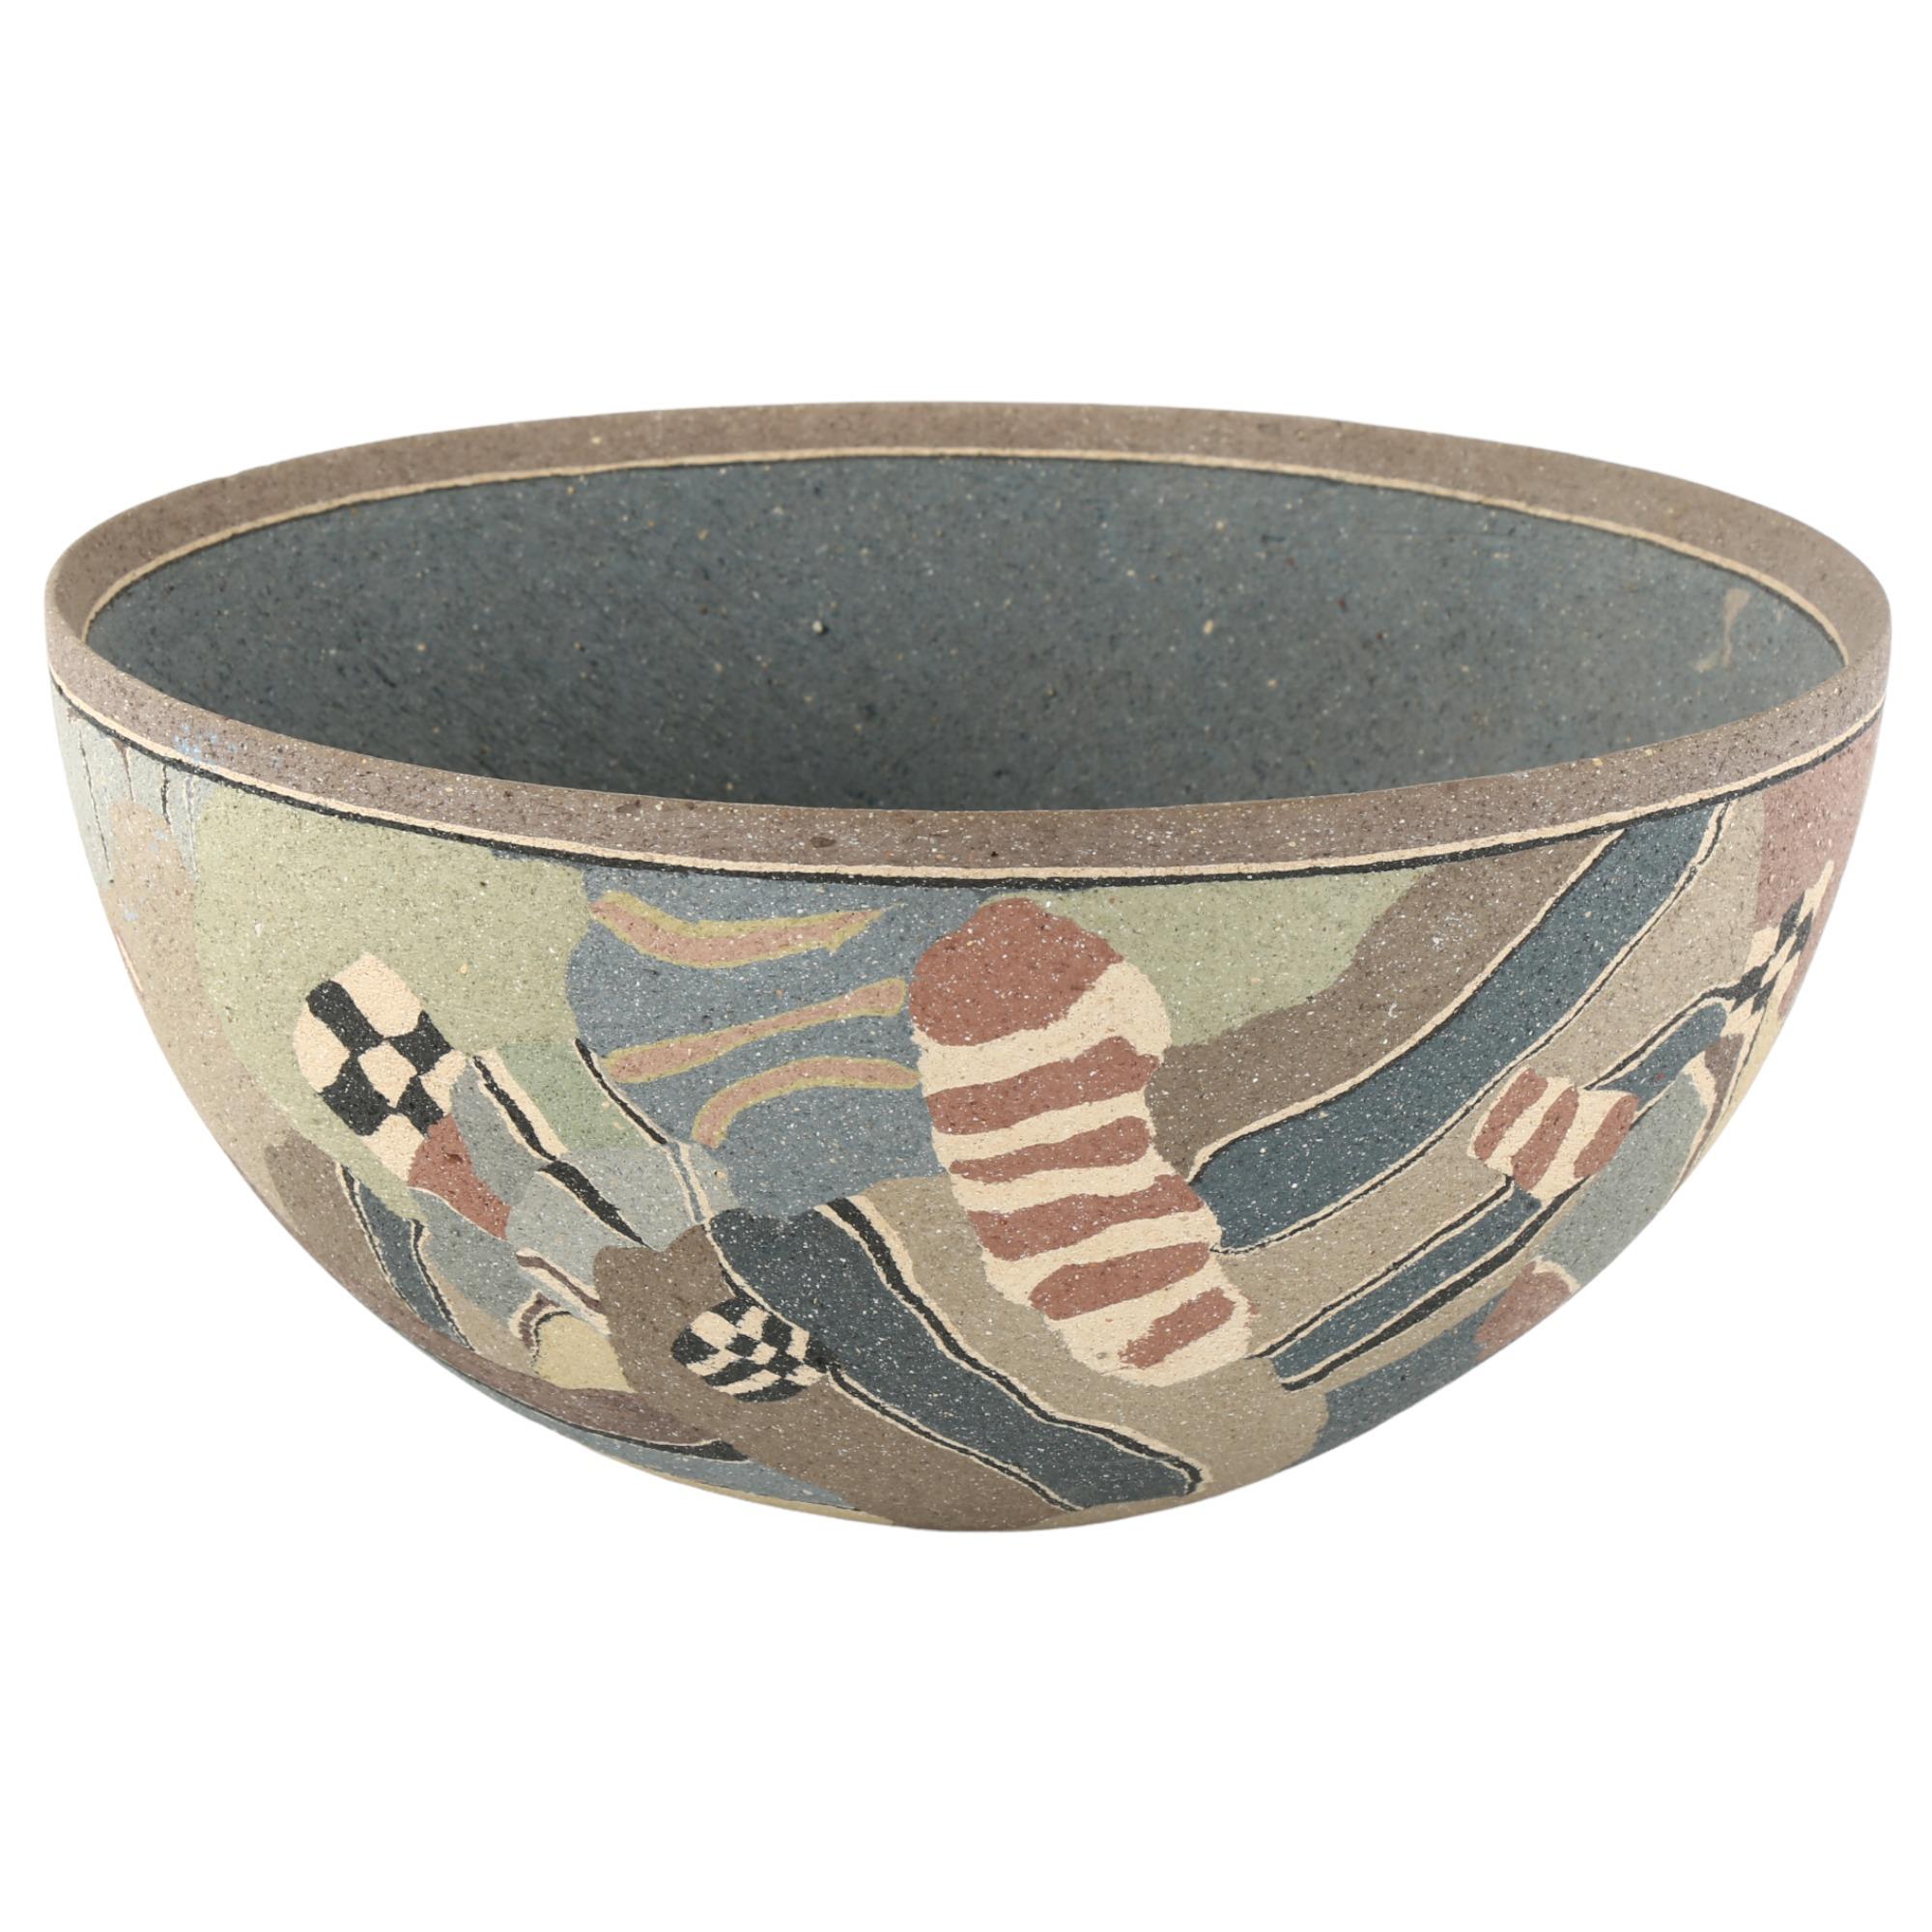 PAUL PHILP, a large studio pottery bowl, with abstract design, signed to base and dated '89,